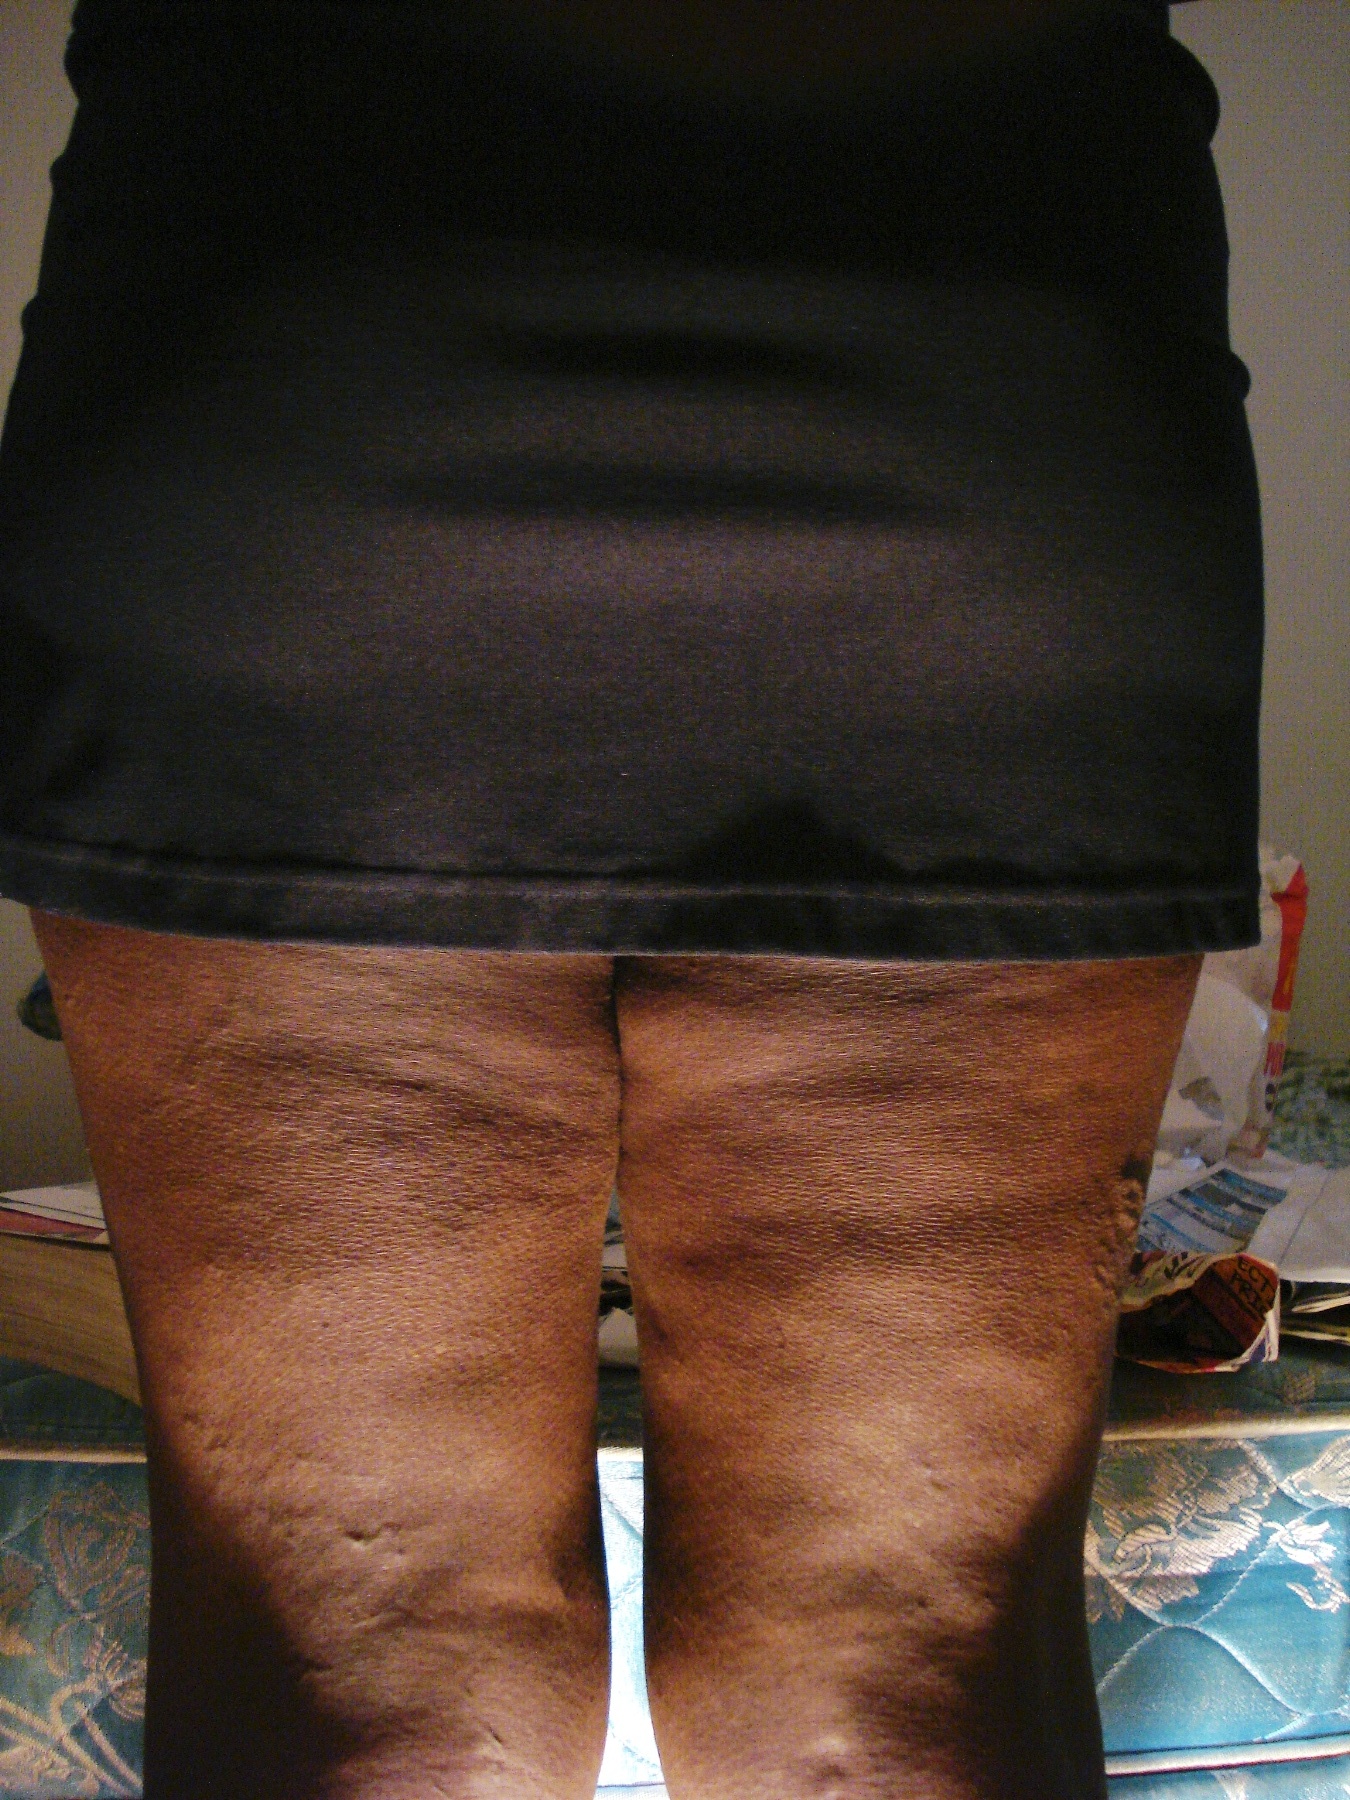 thighs a woman would love to have.